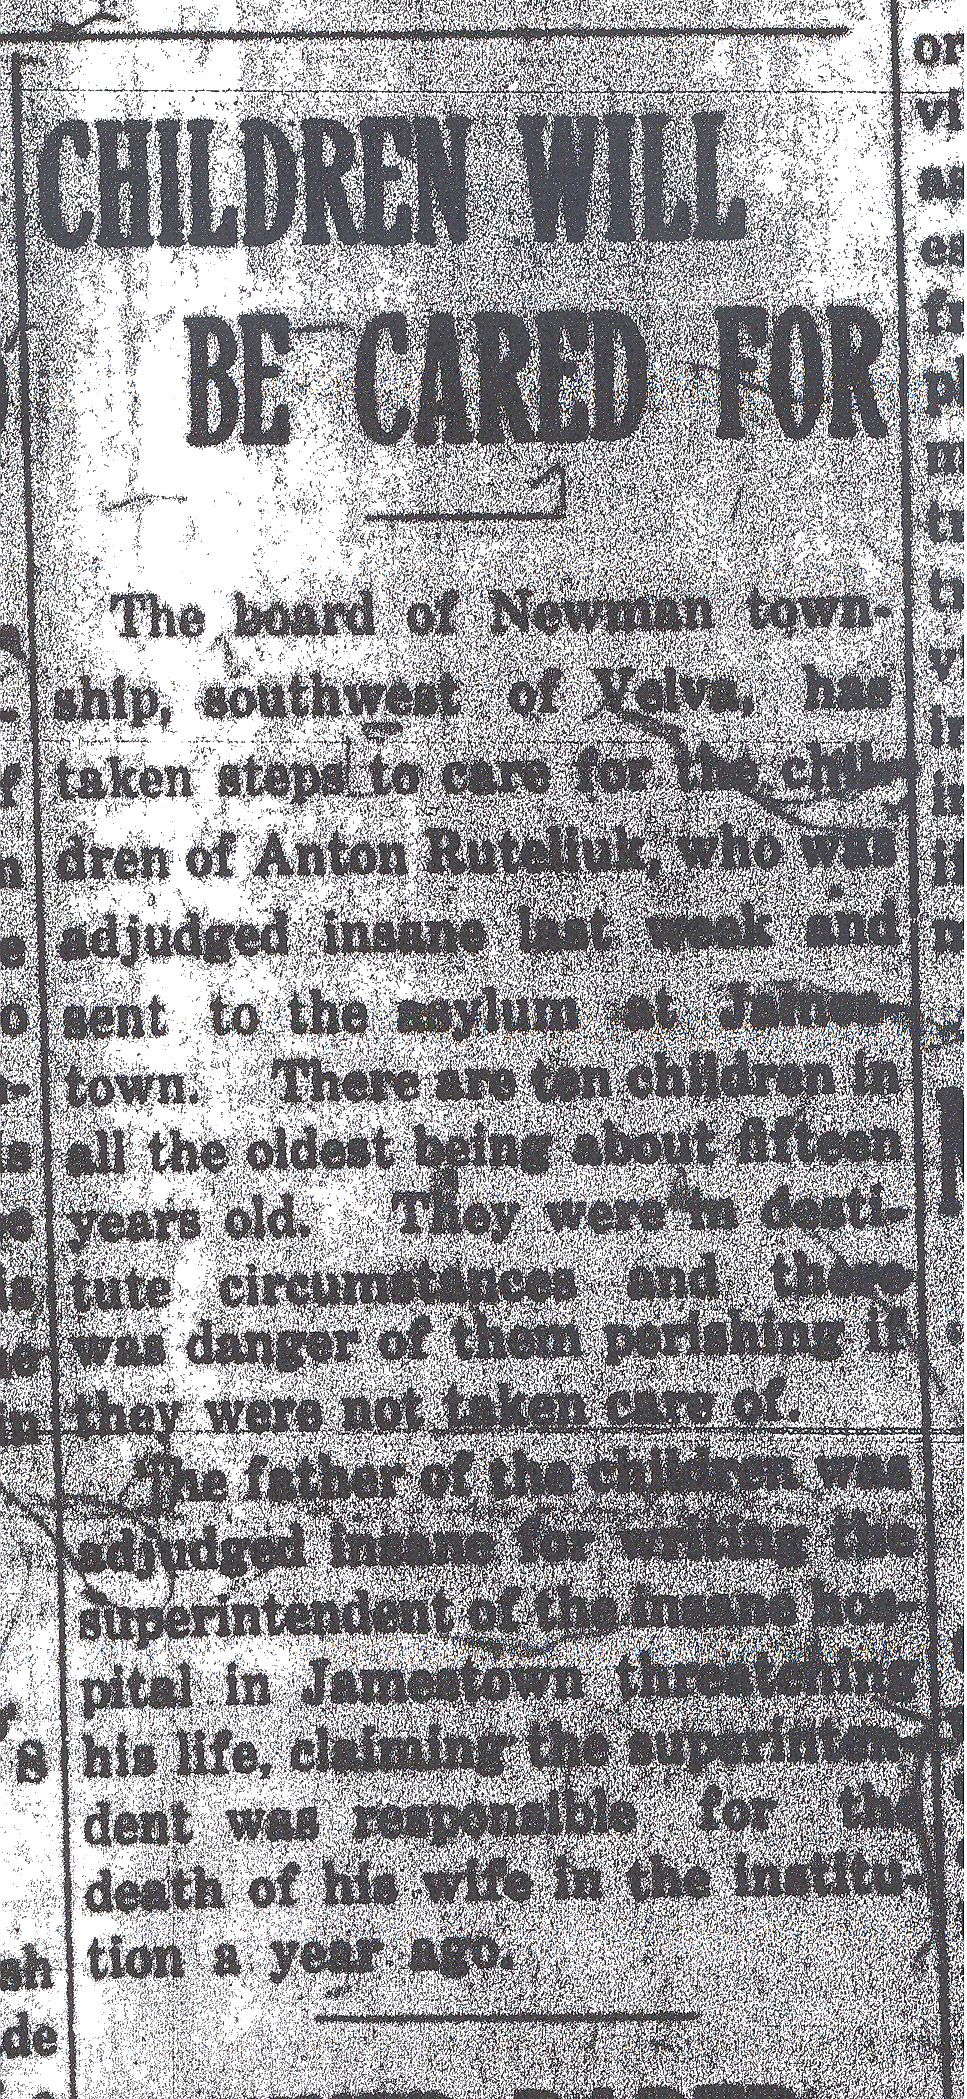 News clipping - Children will be cared for